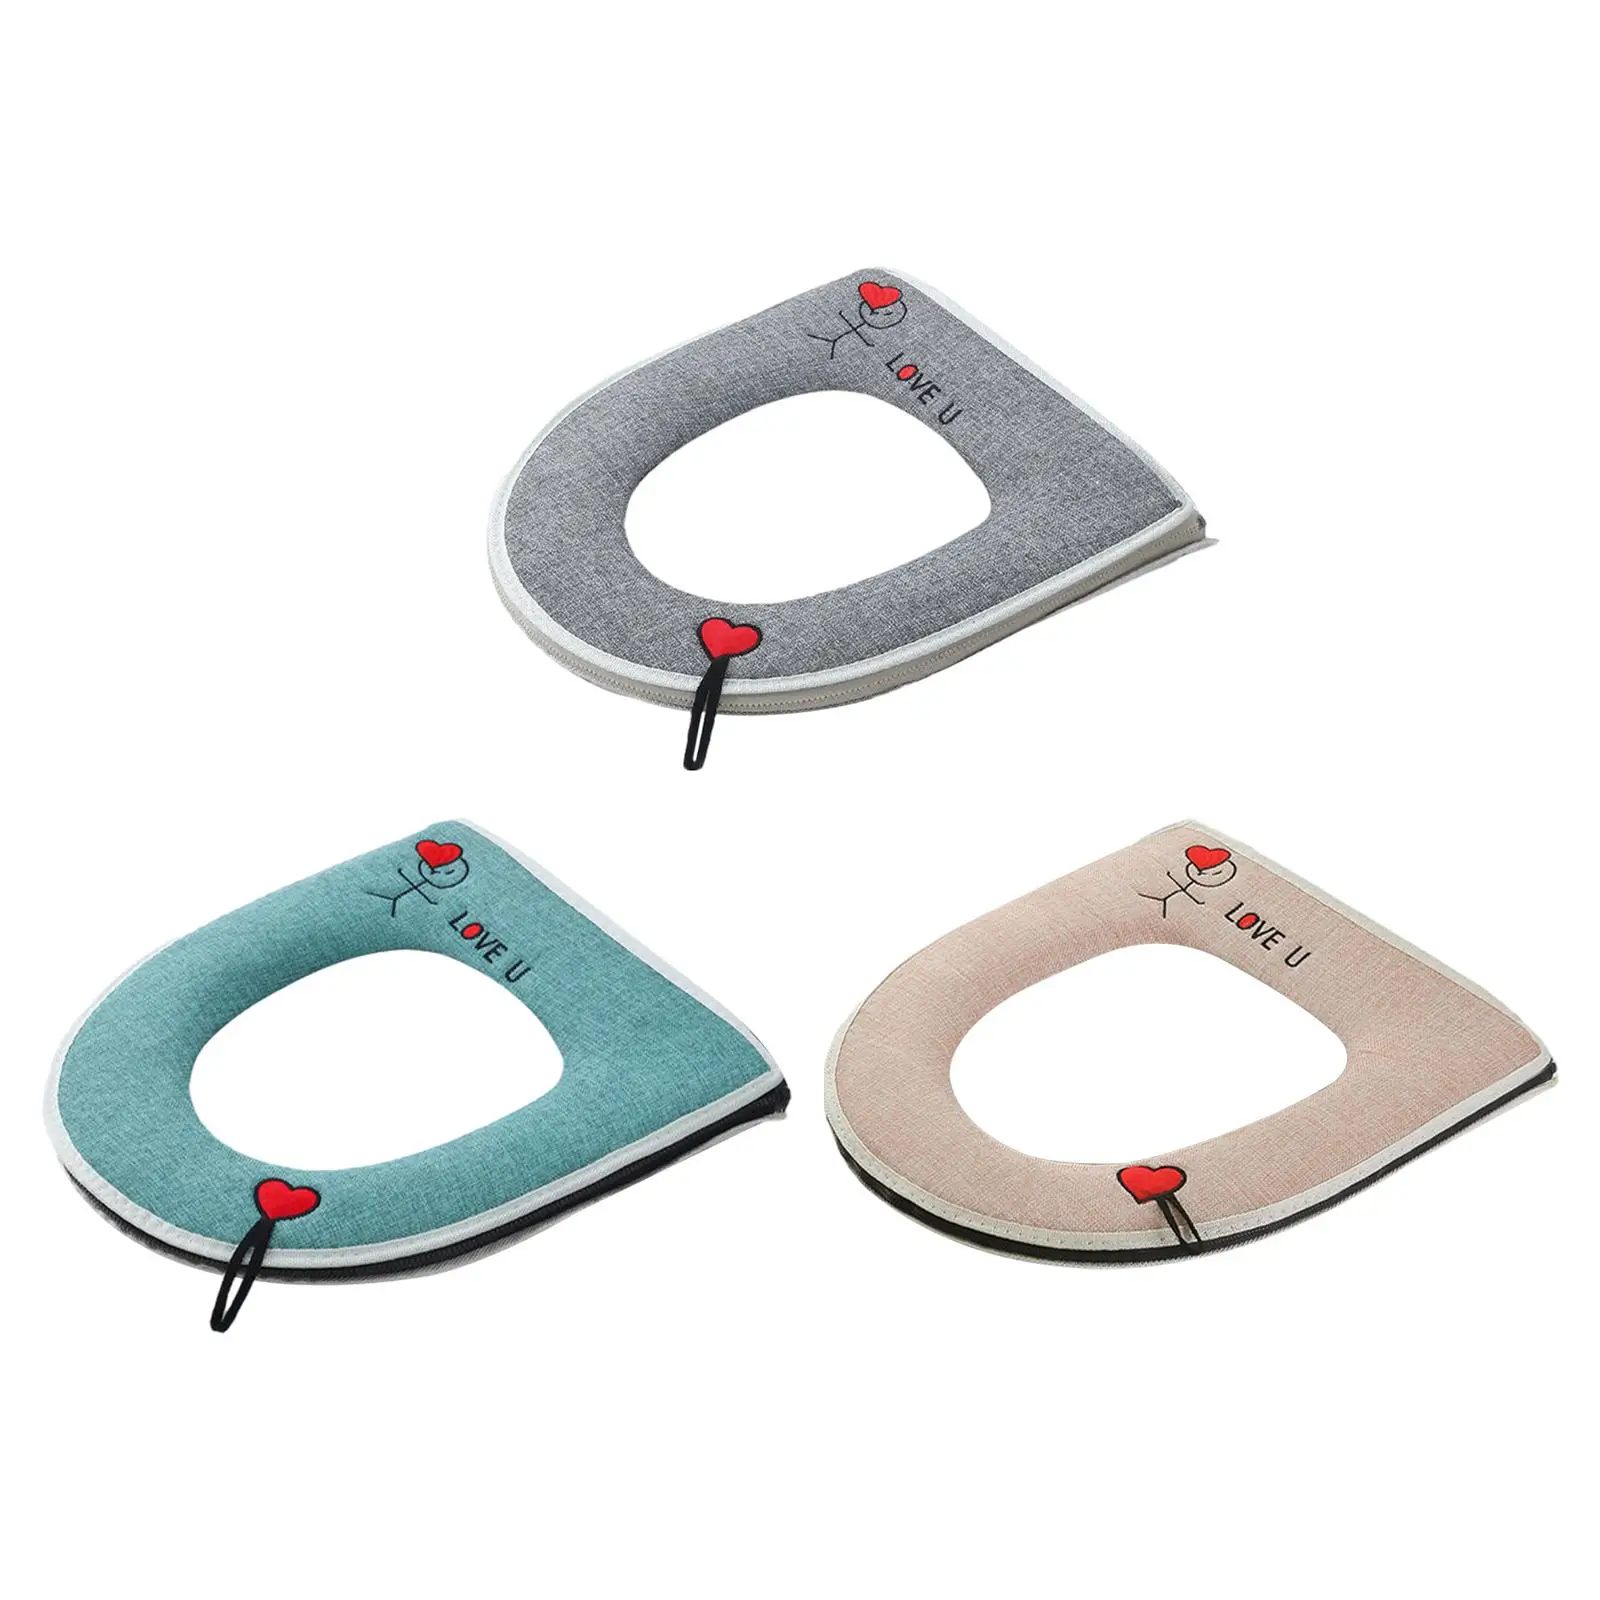 Thicken Toilet Seat Cushion Comfortable Foldable Reusable Soft Portable Warm Toilet Seat Covers for Household Bathroom Traveling